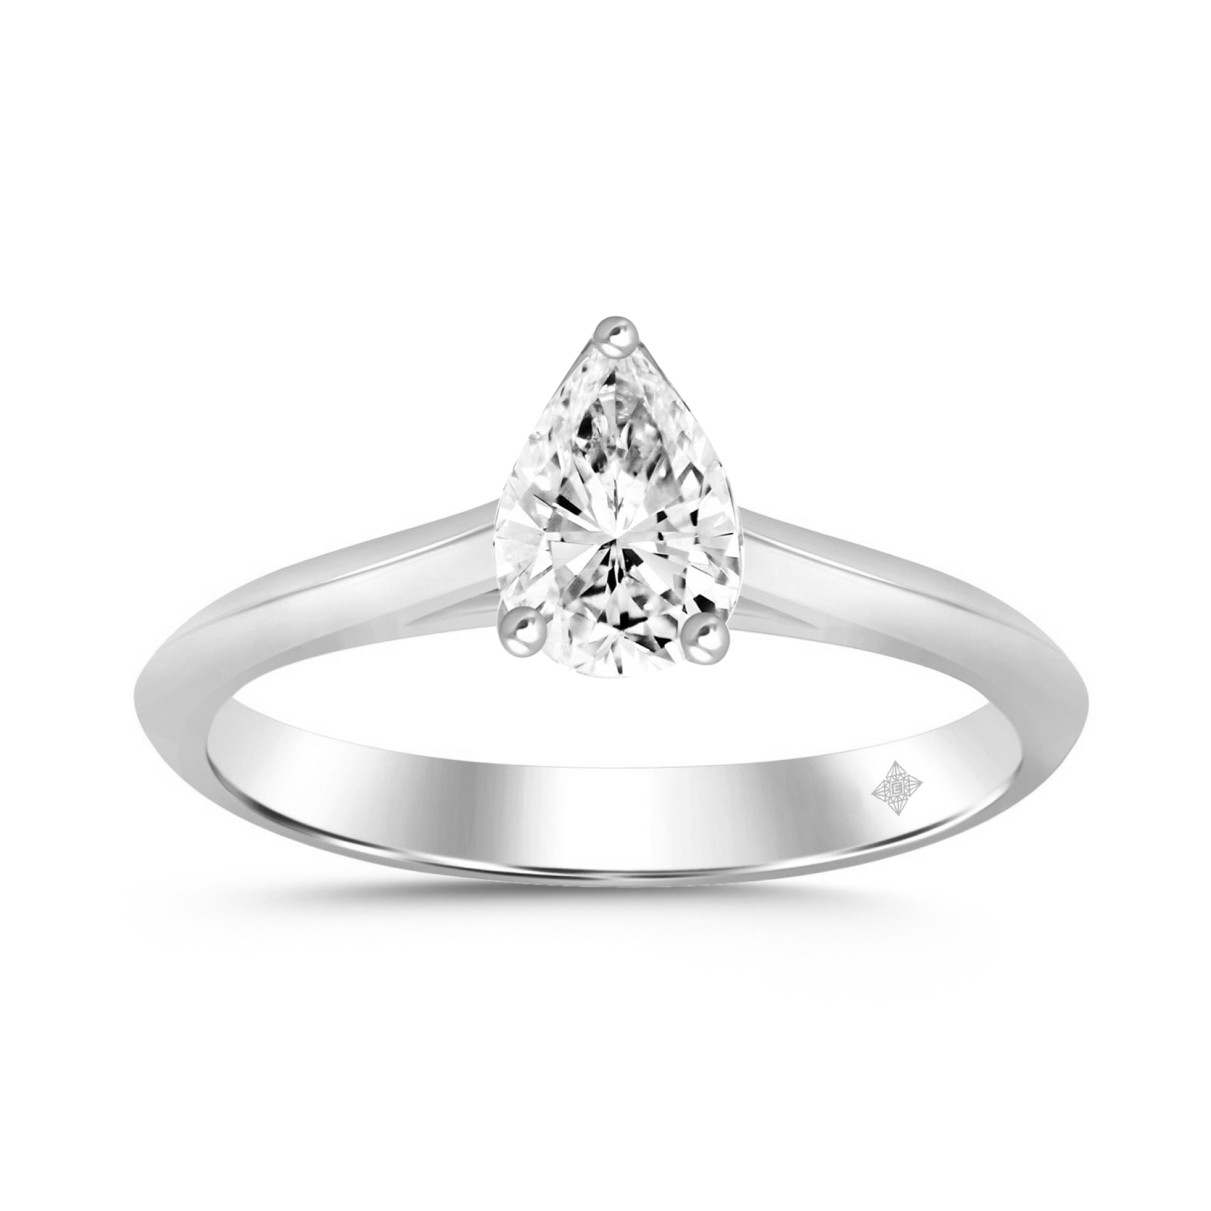 LADIES SOLITAIRE RING 1 1/2CT PEAR DIAMOND 14K WHI...